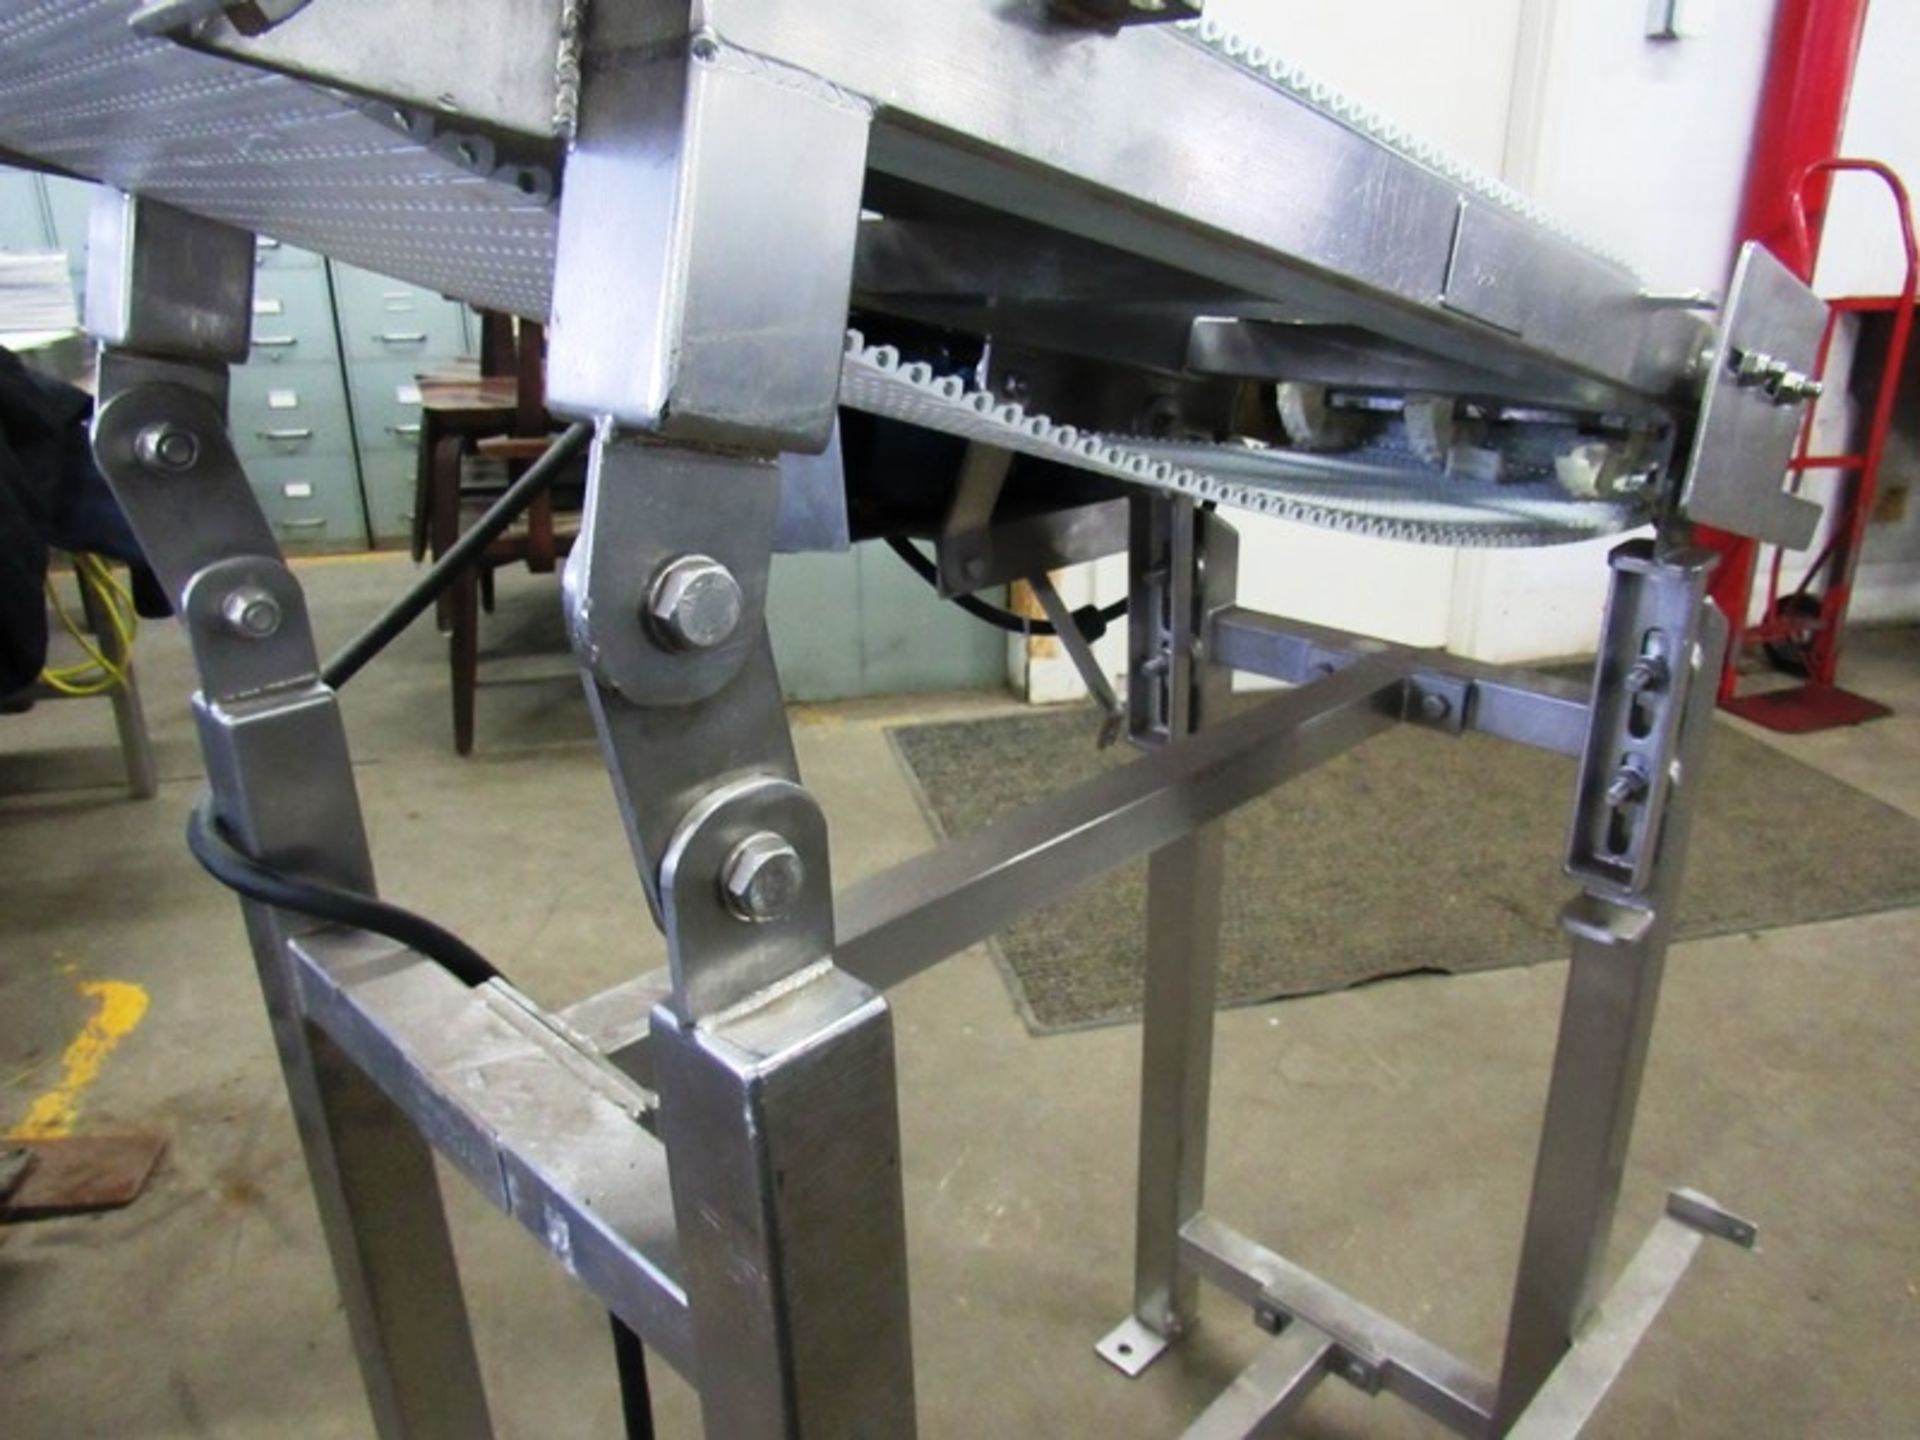 Stainless Steel Conveyor, 12" W X 40" L, adjustable incline to flat, 230/460 volt motor - Image 3 of 3